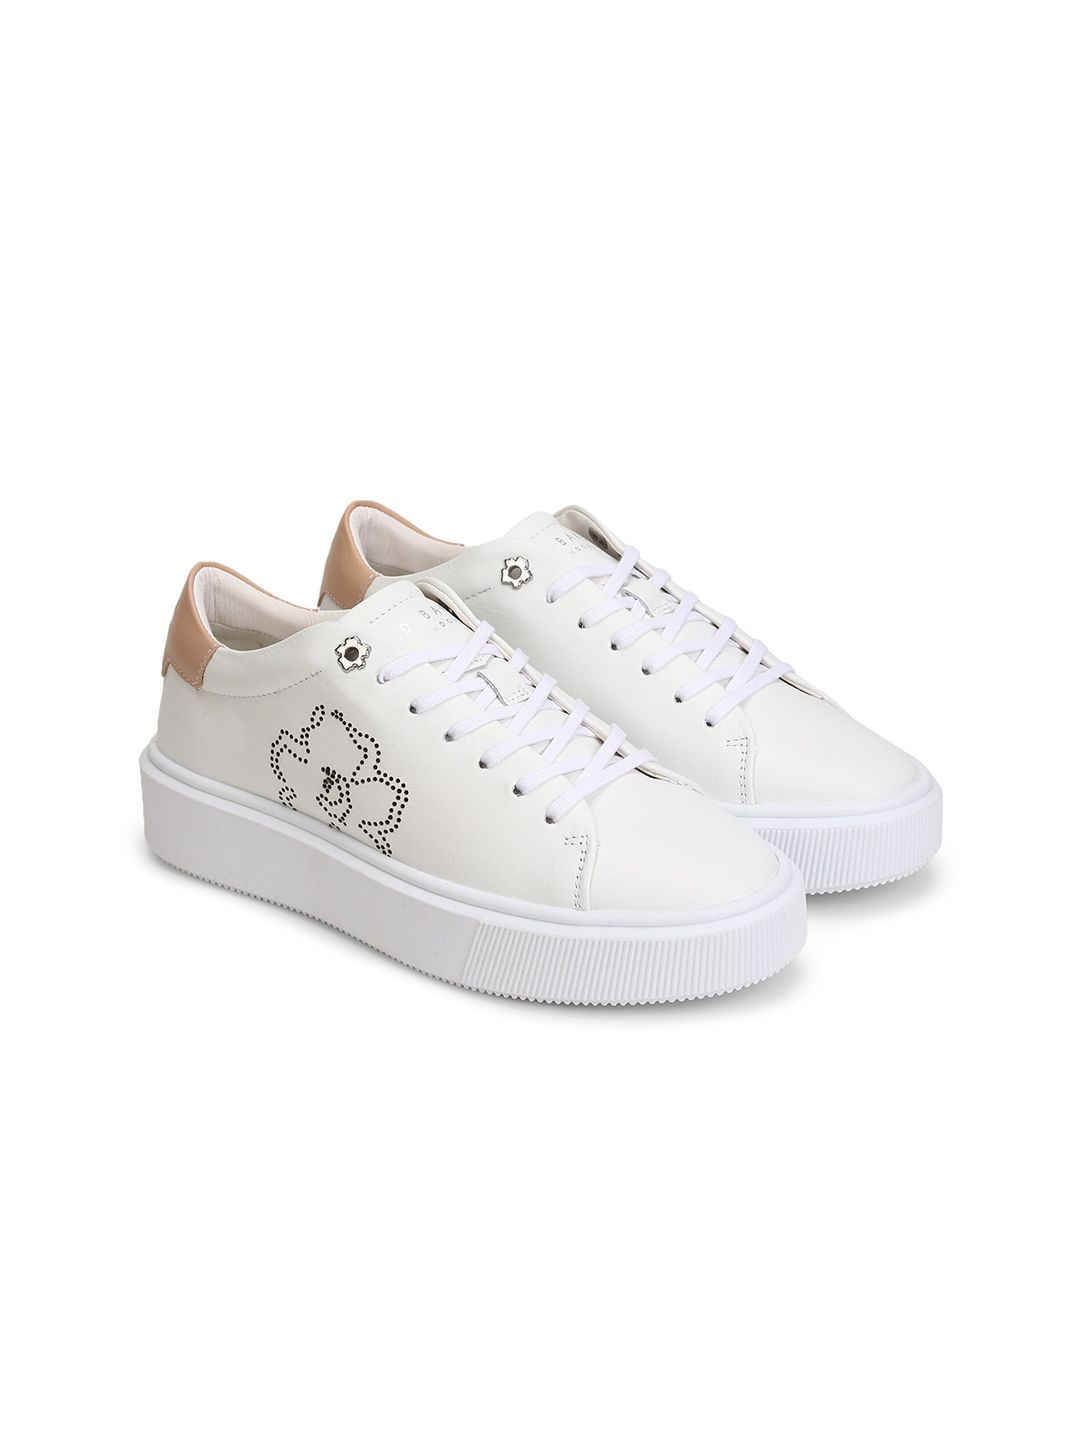 Ted Baker Women White Leather Sneakers Price in India